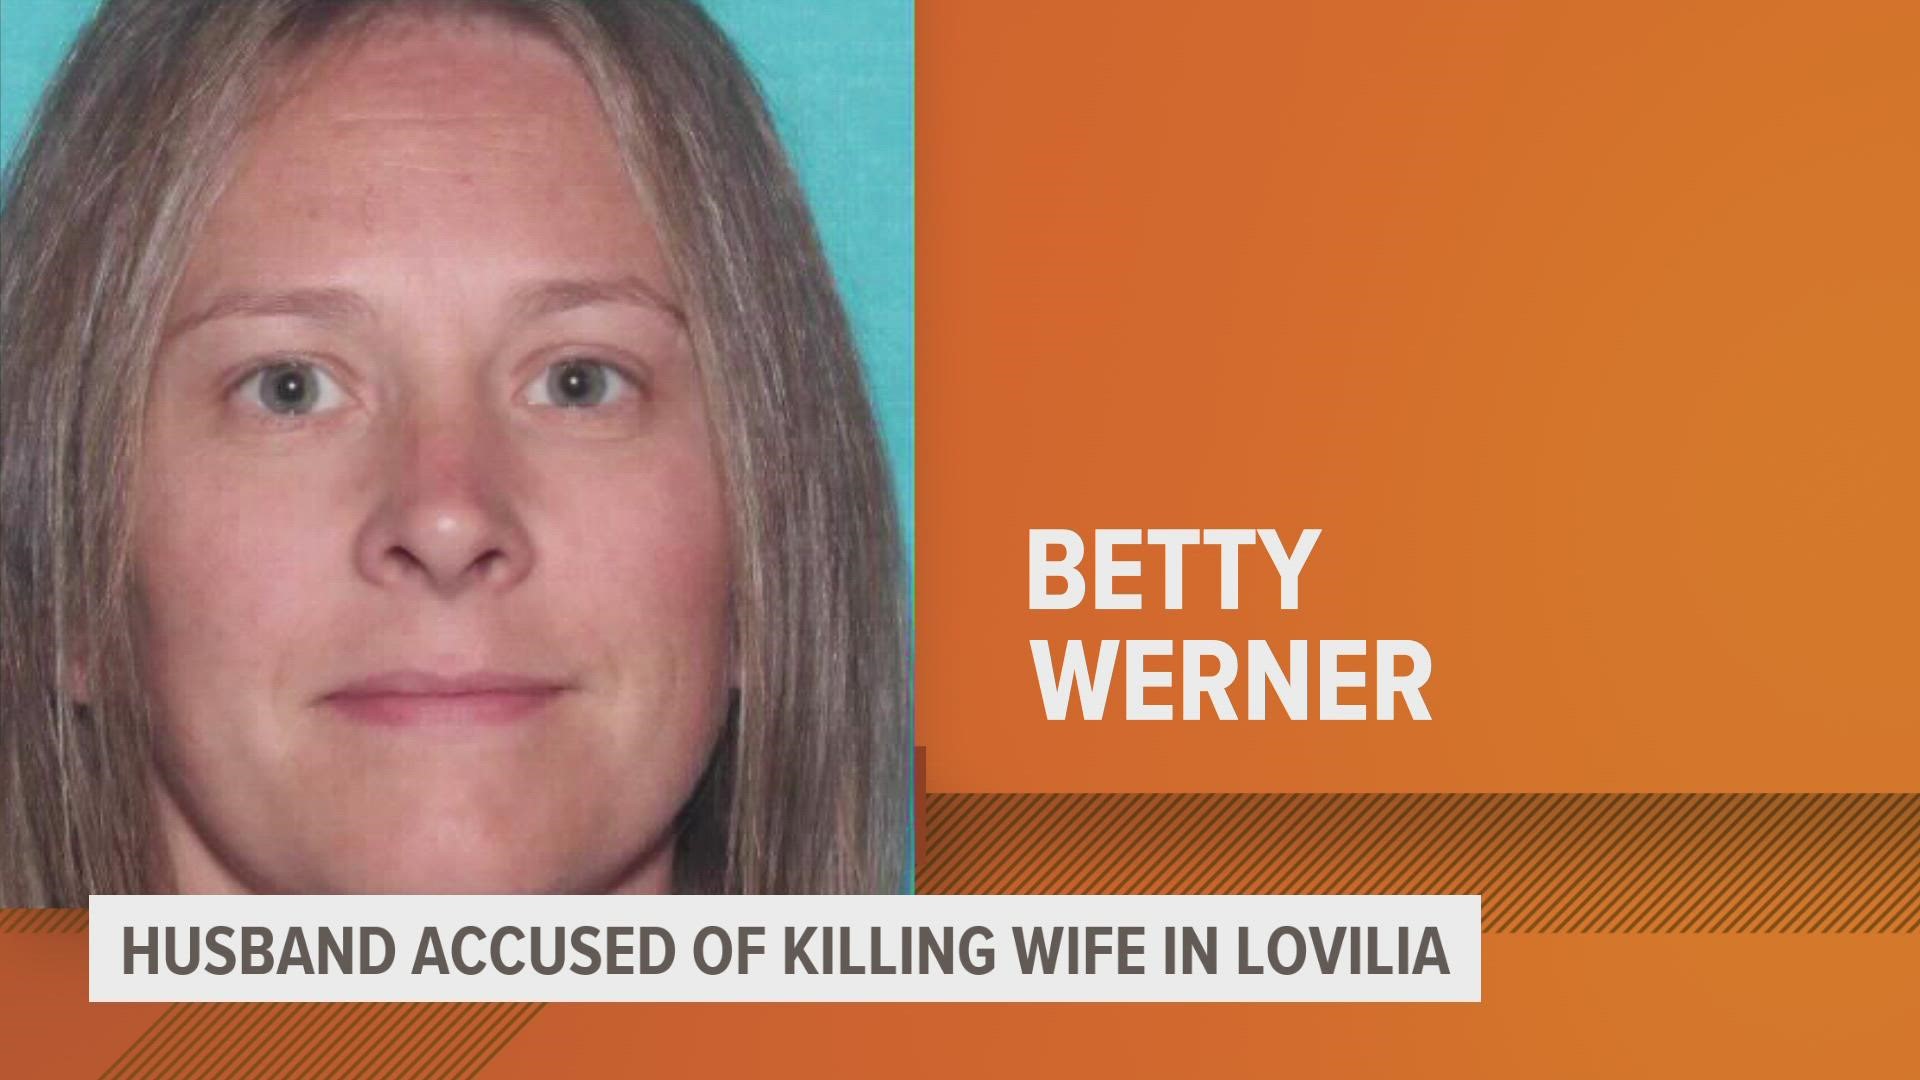 33-year-old Betty Werner died of multiple gunshot wounds. Her husband, 41-year-old Nathan Werner, has been identified as "the sole person responsible for her death."